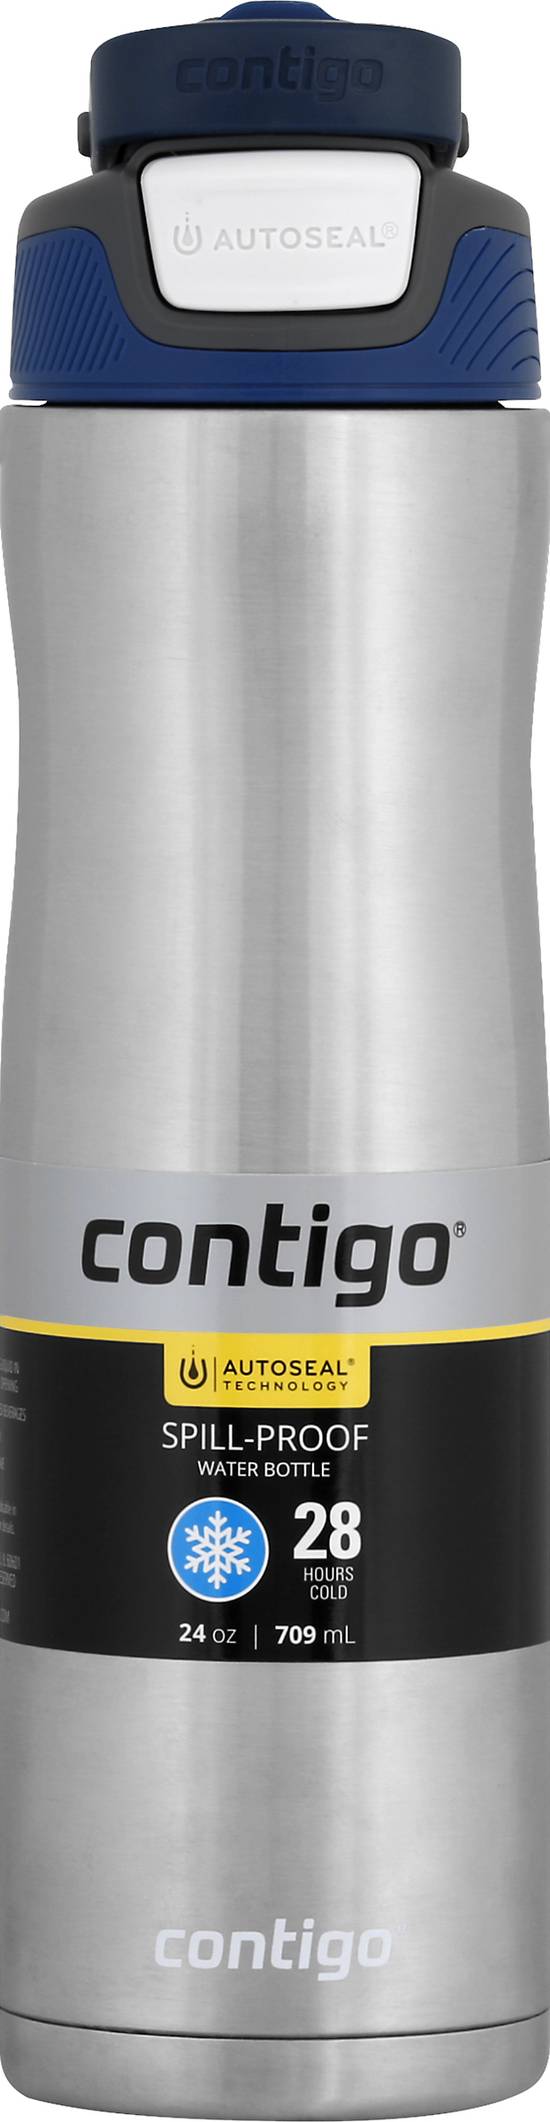 Contigo Autoseal Chill Vacuum-Insulated Stainless Steel Water Bottle - 24 Oz .